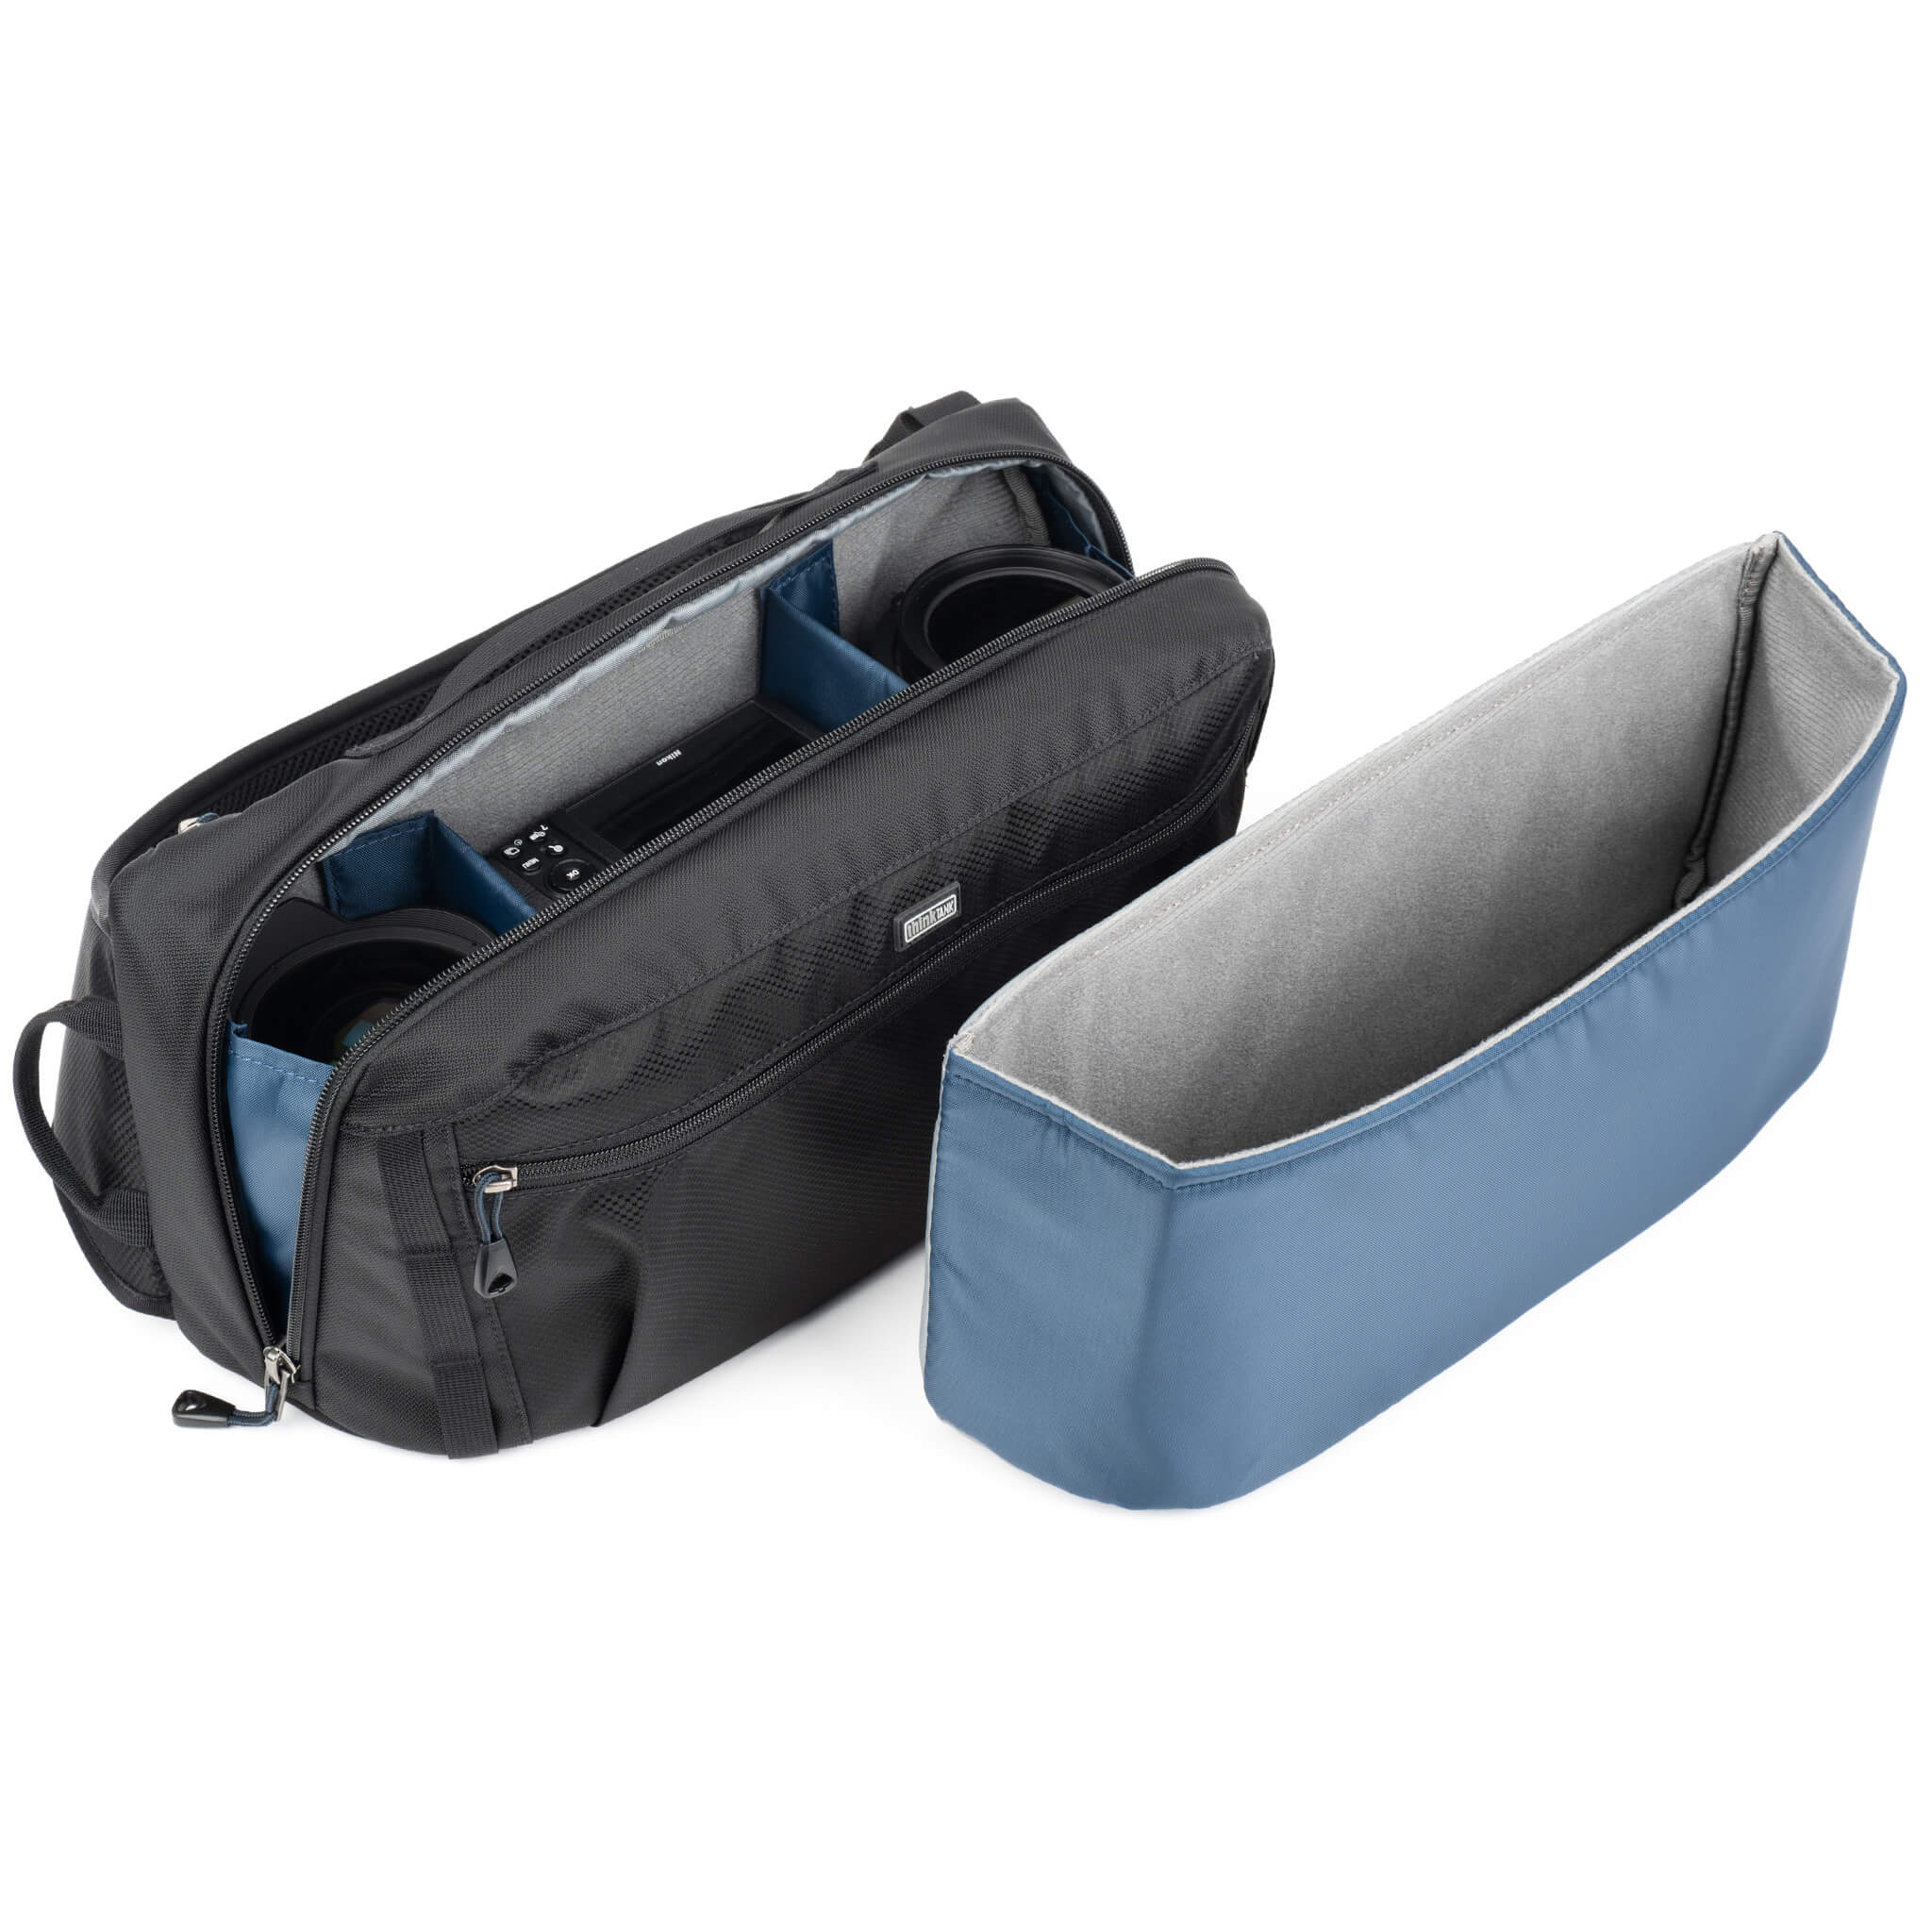 Removable interior padded insert for photographers who need less foam to increase space in the bag